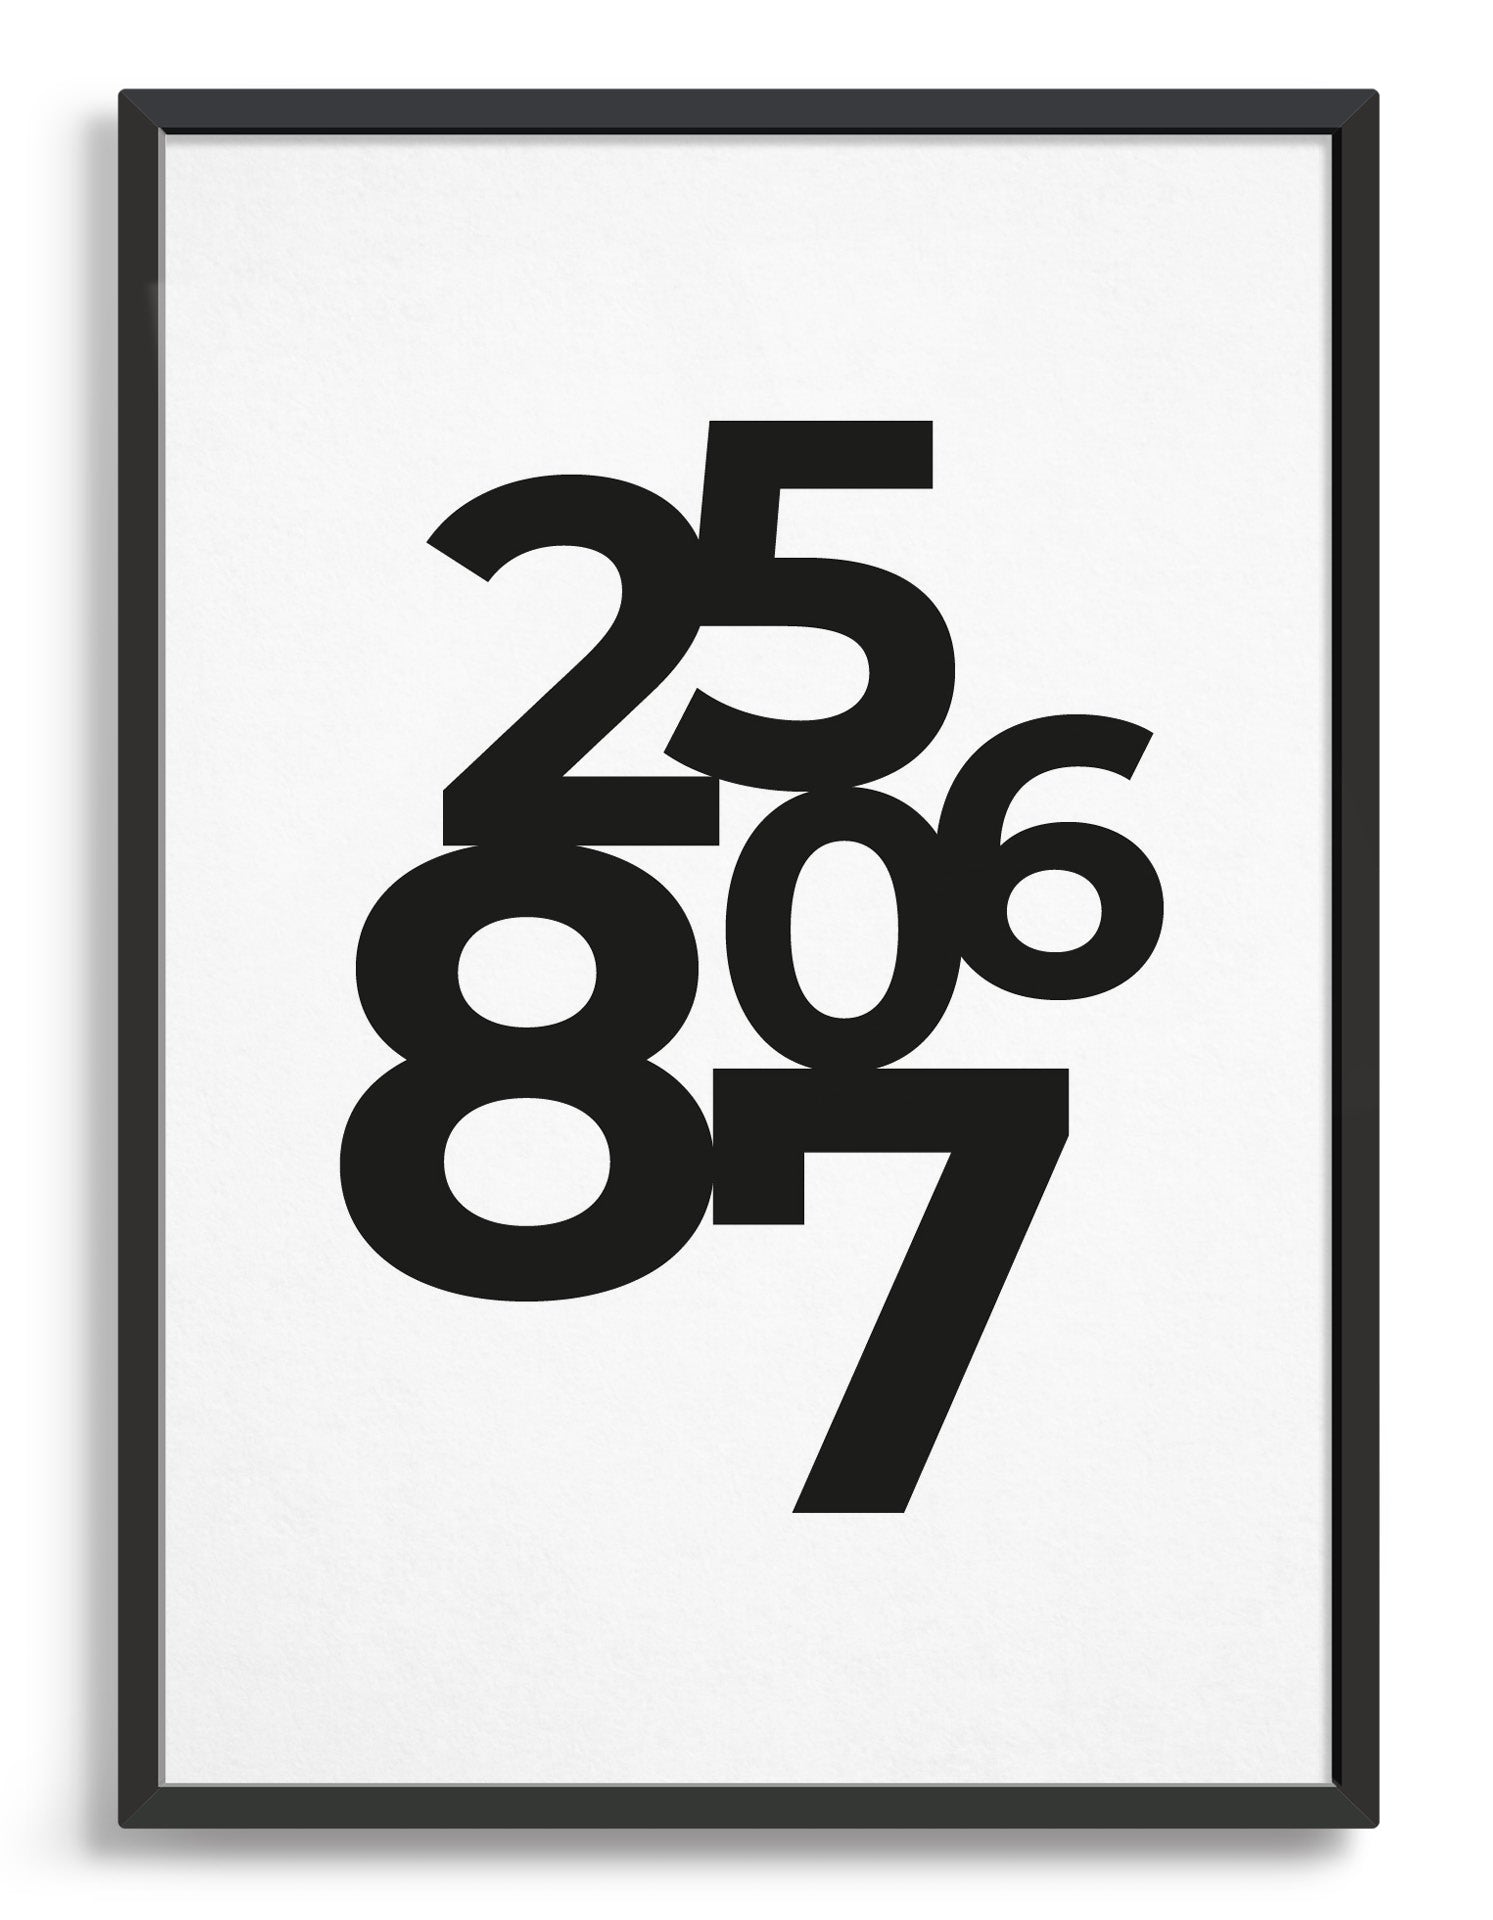 Framed typography art print of Personalised date in black text against a white background